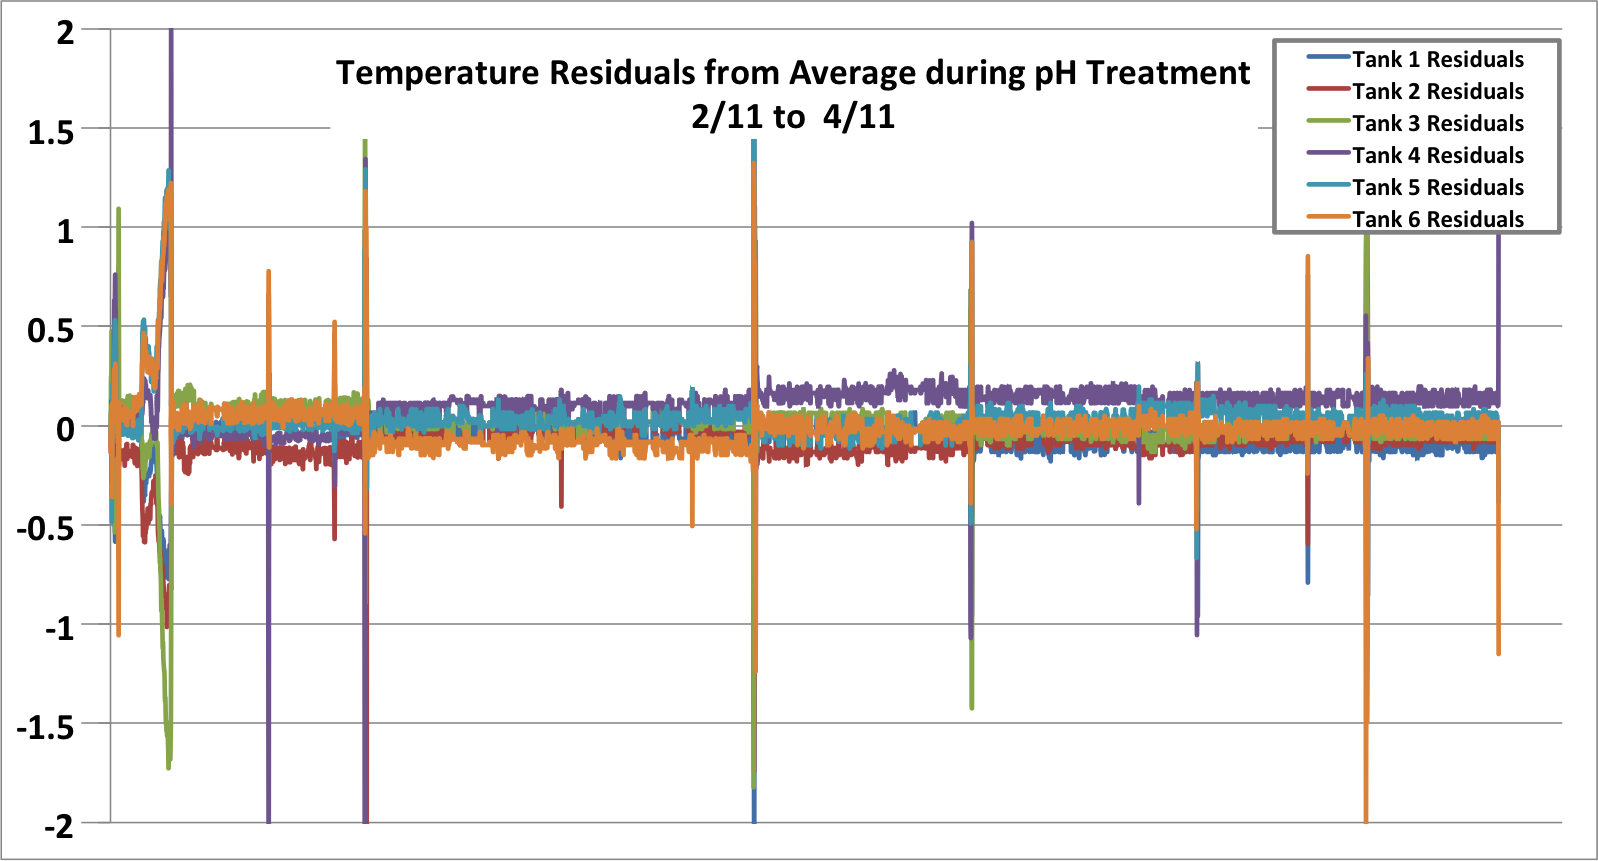 Residuals from Average Temp during pH Treatments